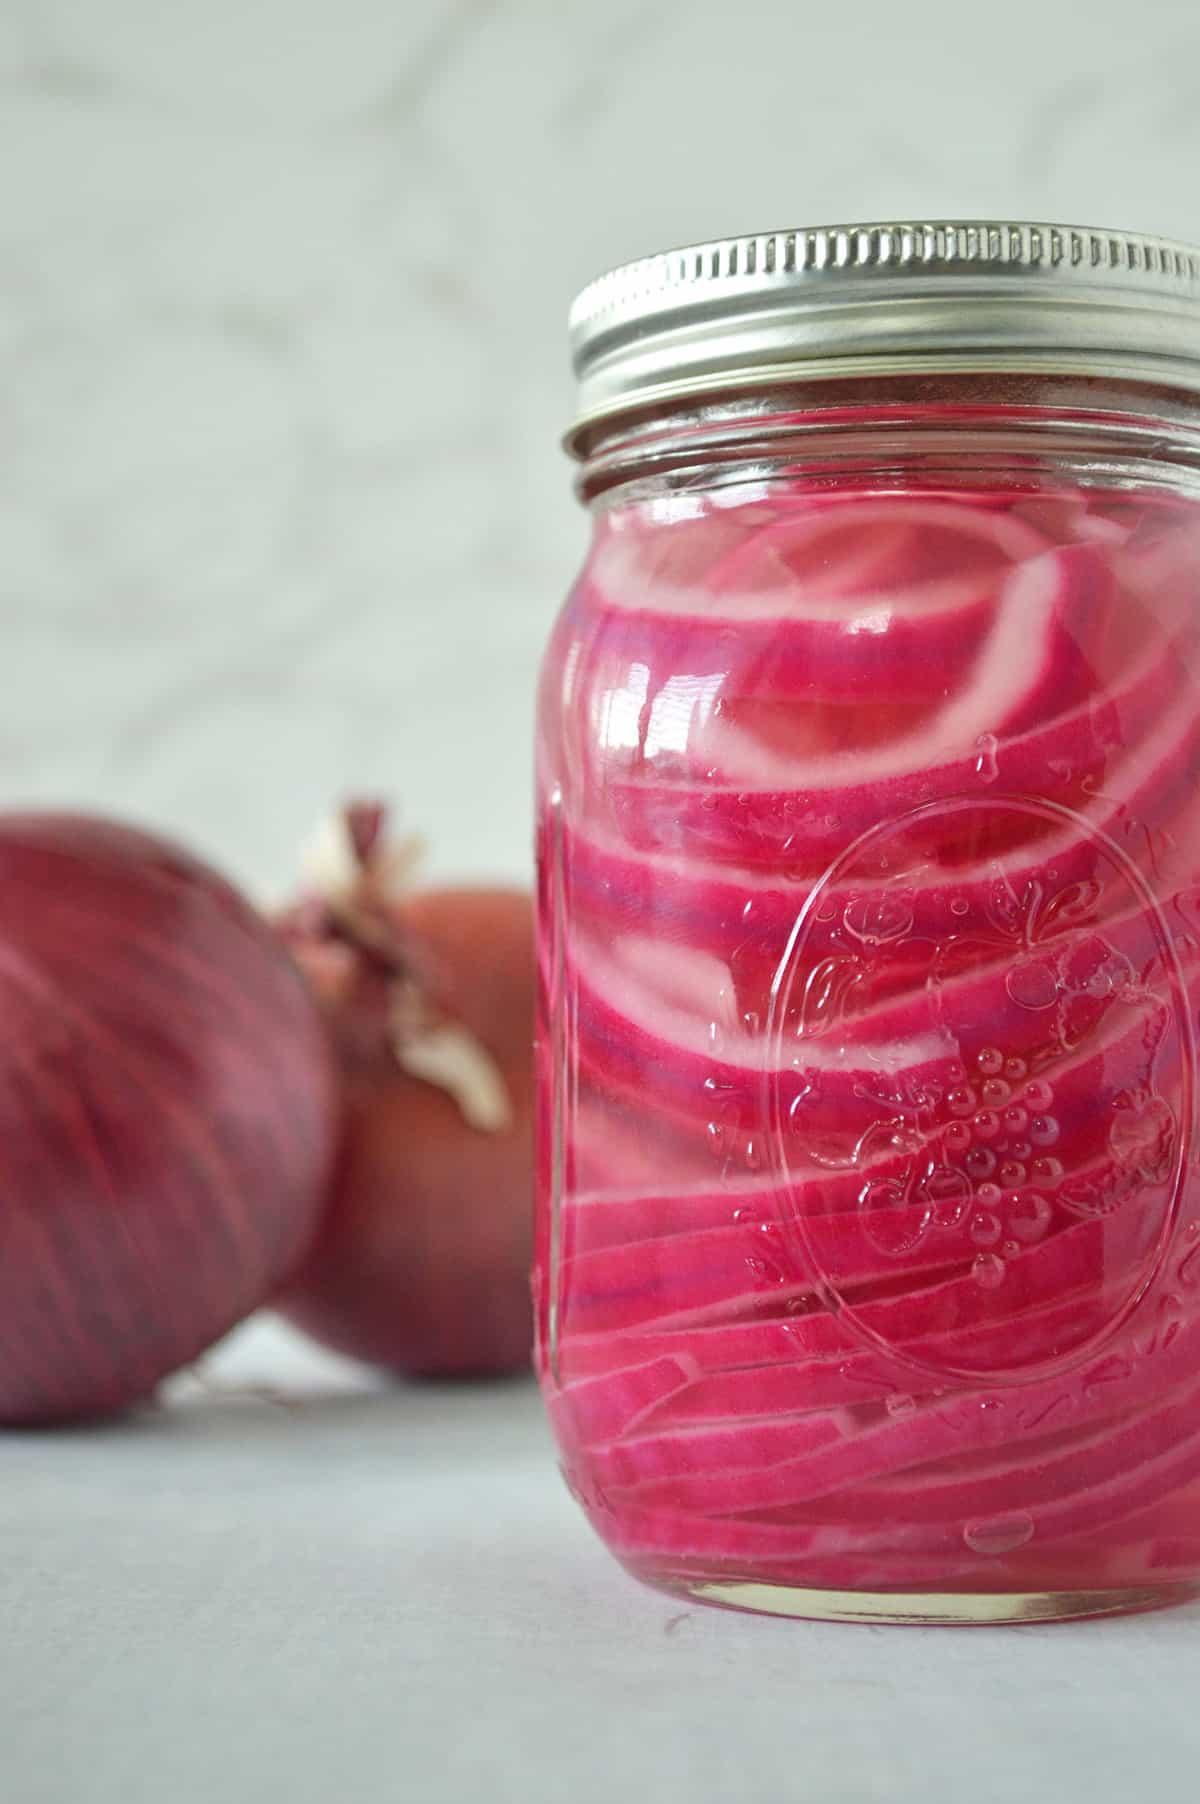 Mason jar filled with pickled red onions. Two large whole red onions in the background.